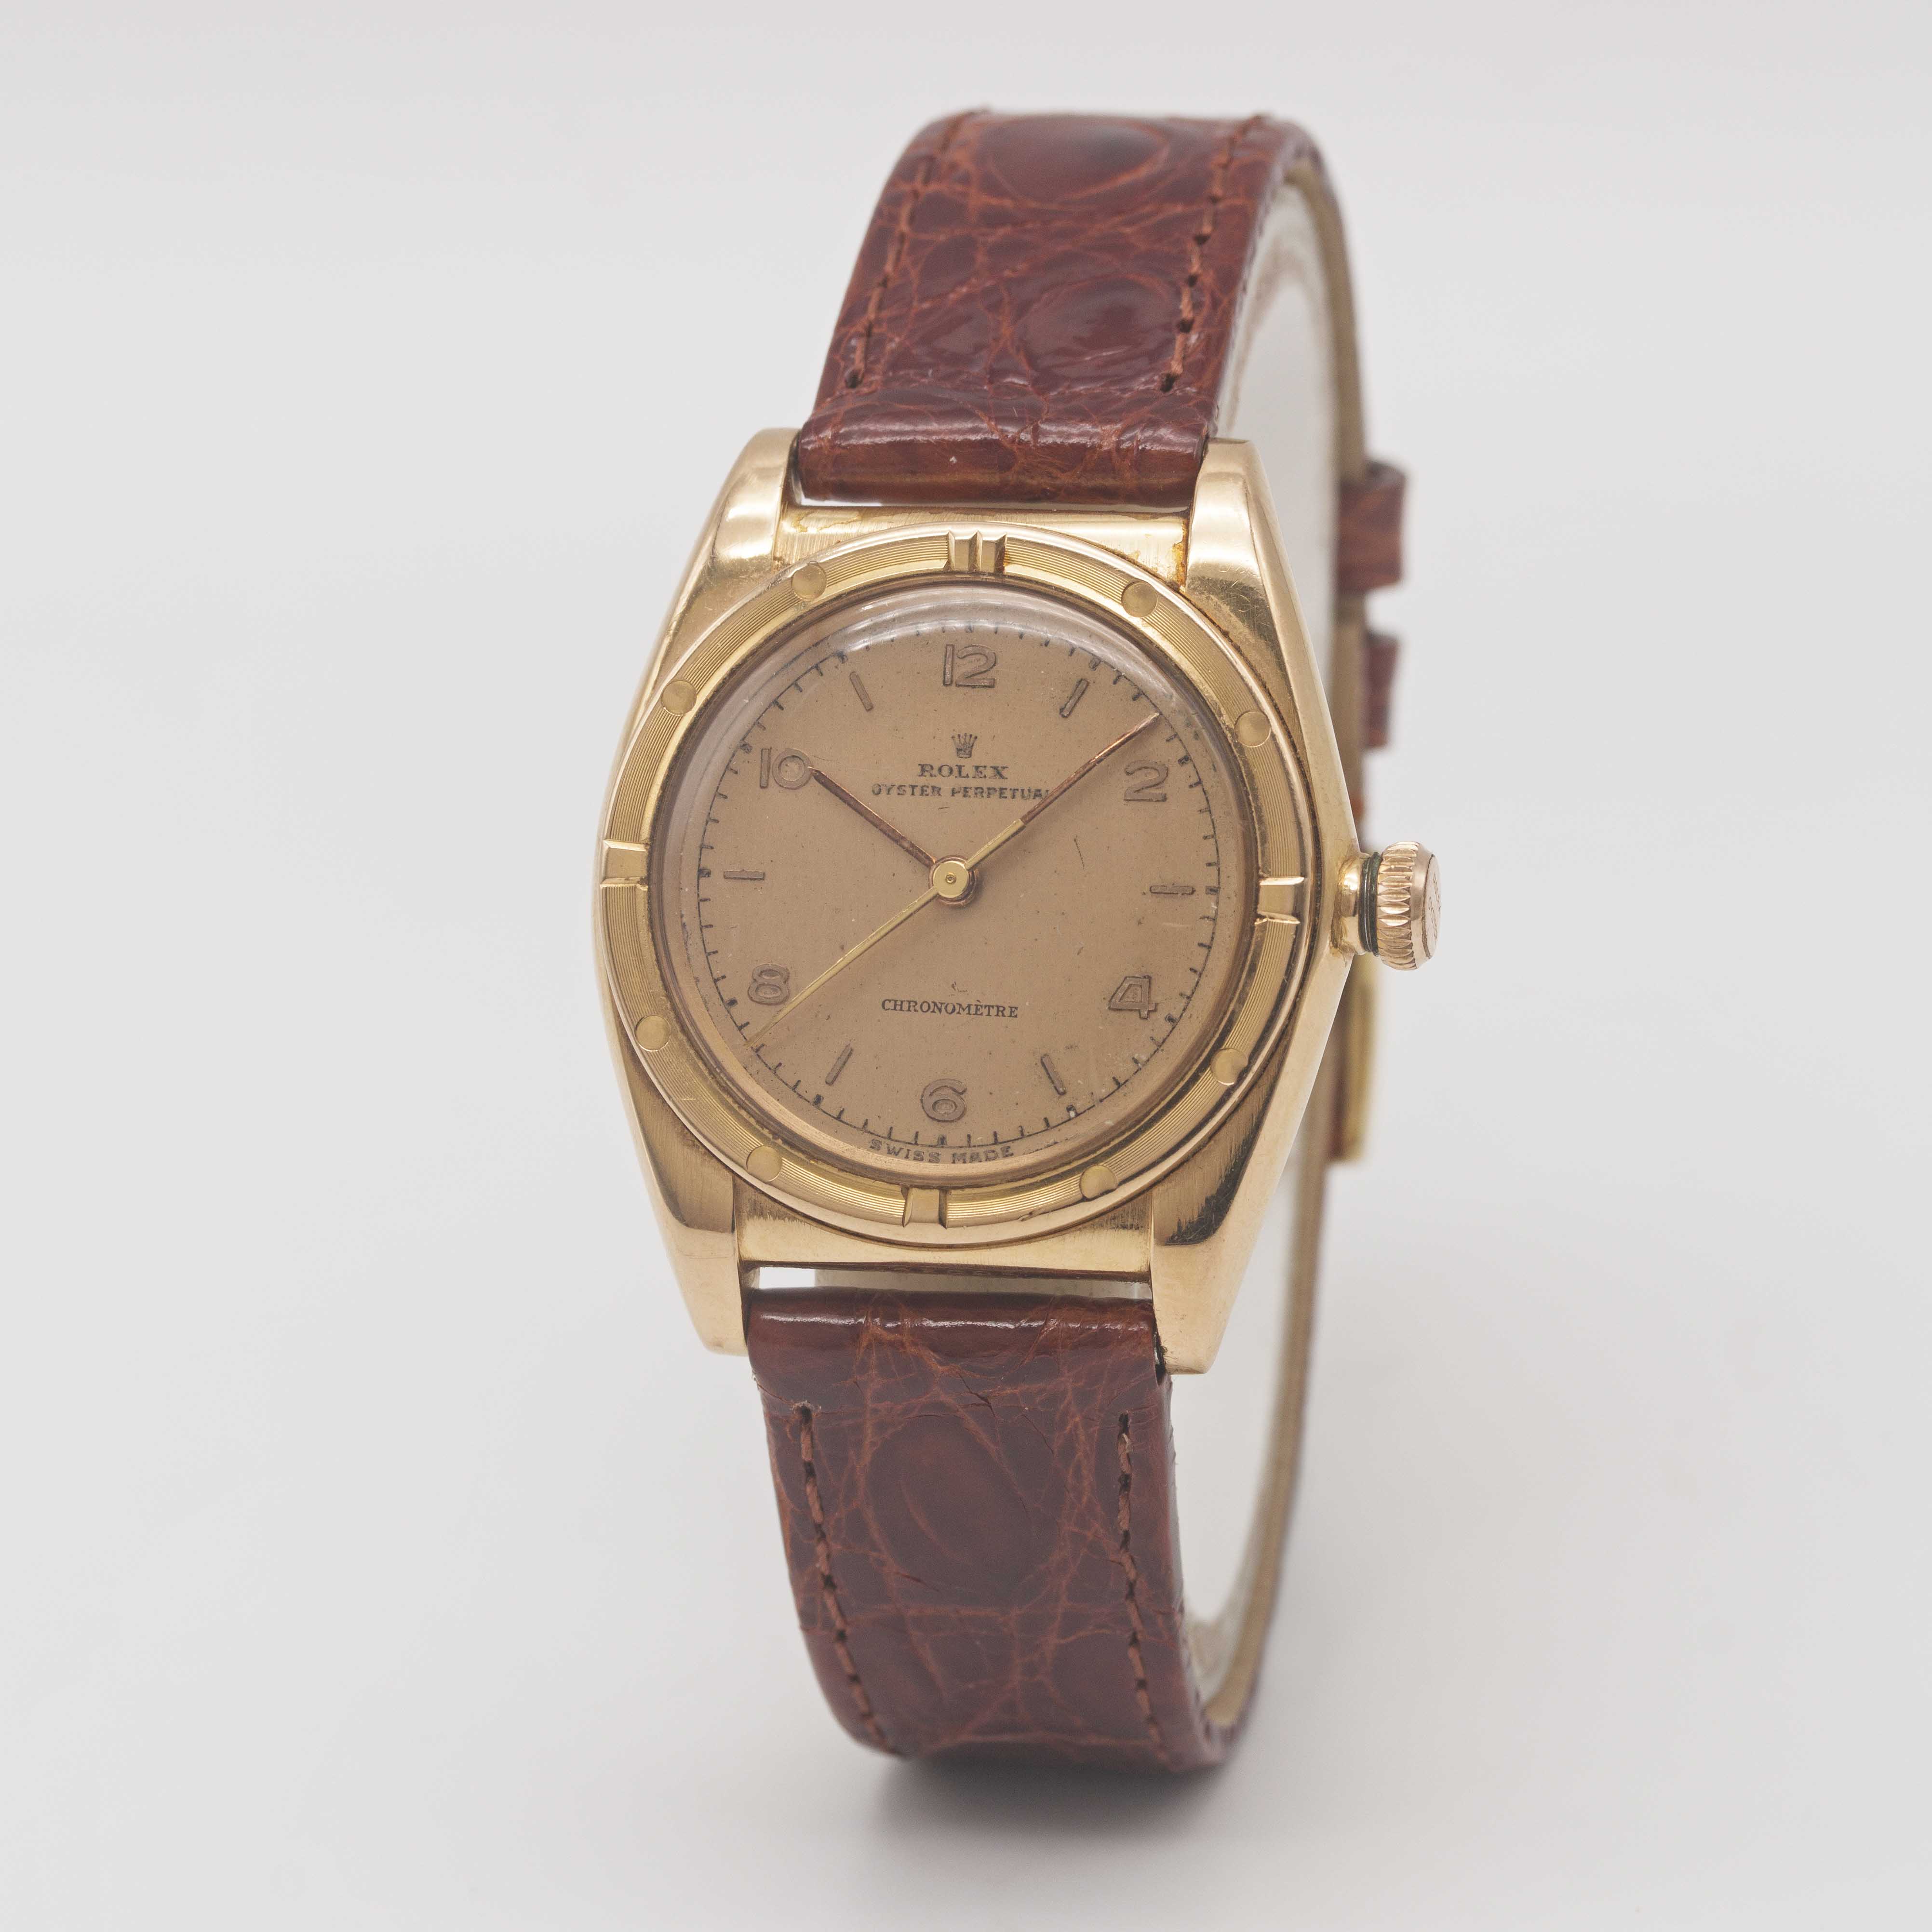 A GENTLEMAN'S 18K SOLID YELLOW GOLD ROLEX OYSTER PERPETUAL CHRONOMETRE "BUBBLE BACK" WRIST WATCH - Image 4 of 10